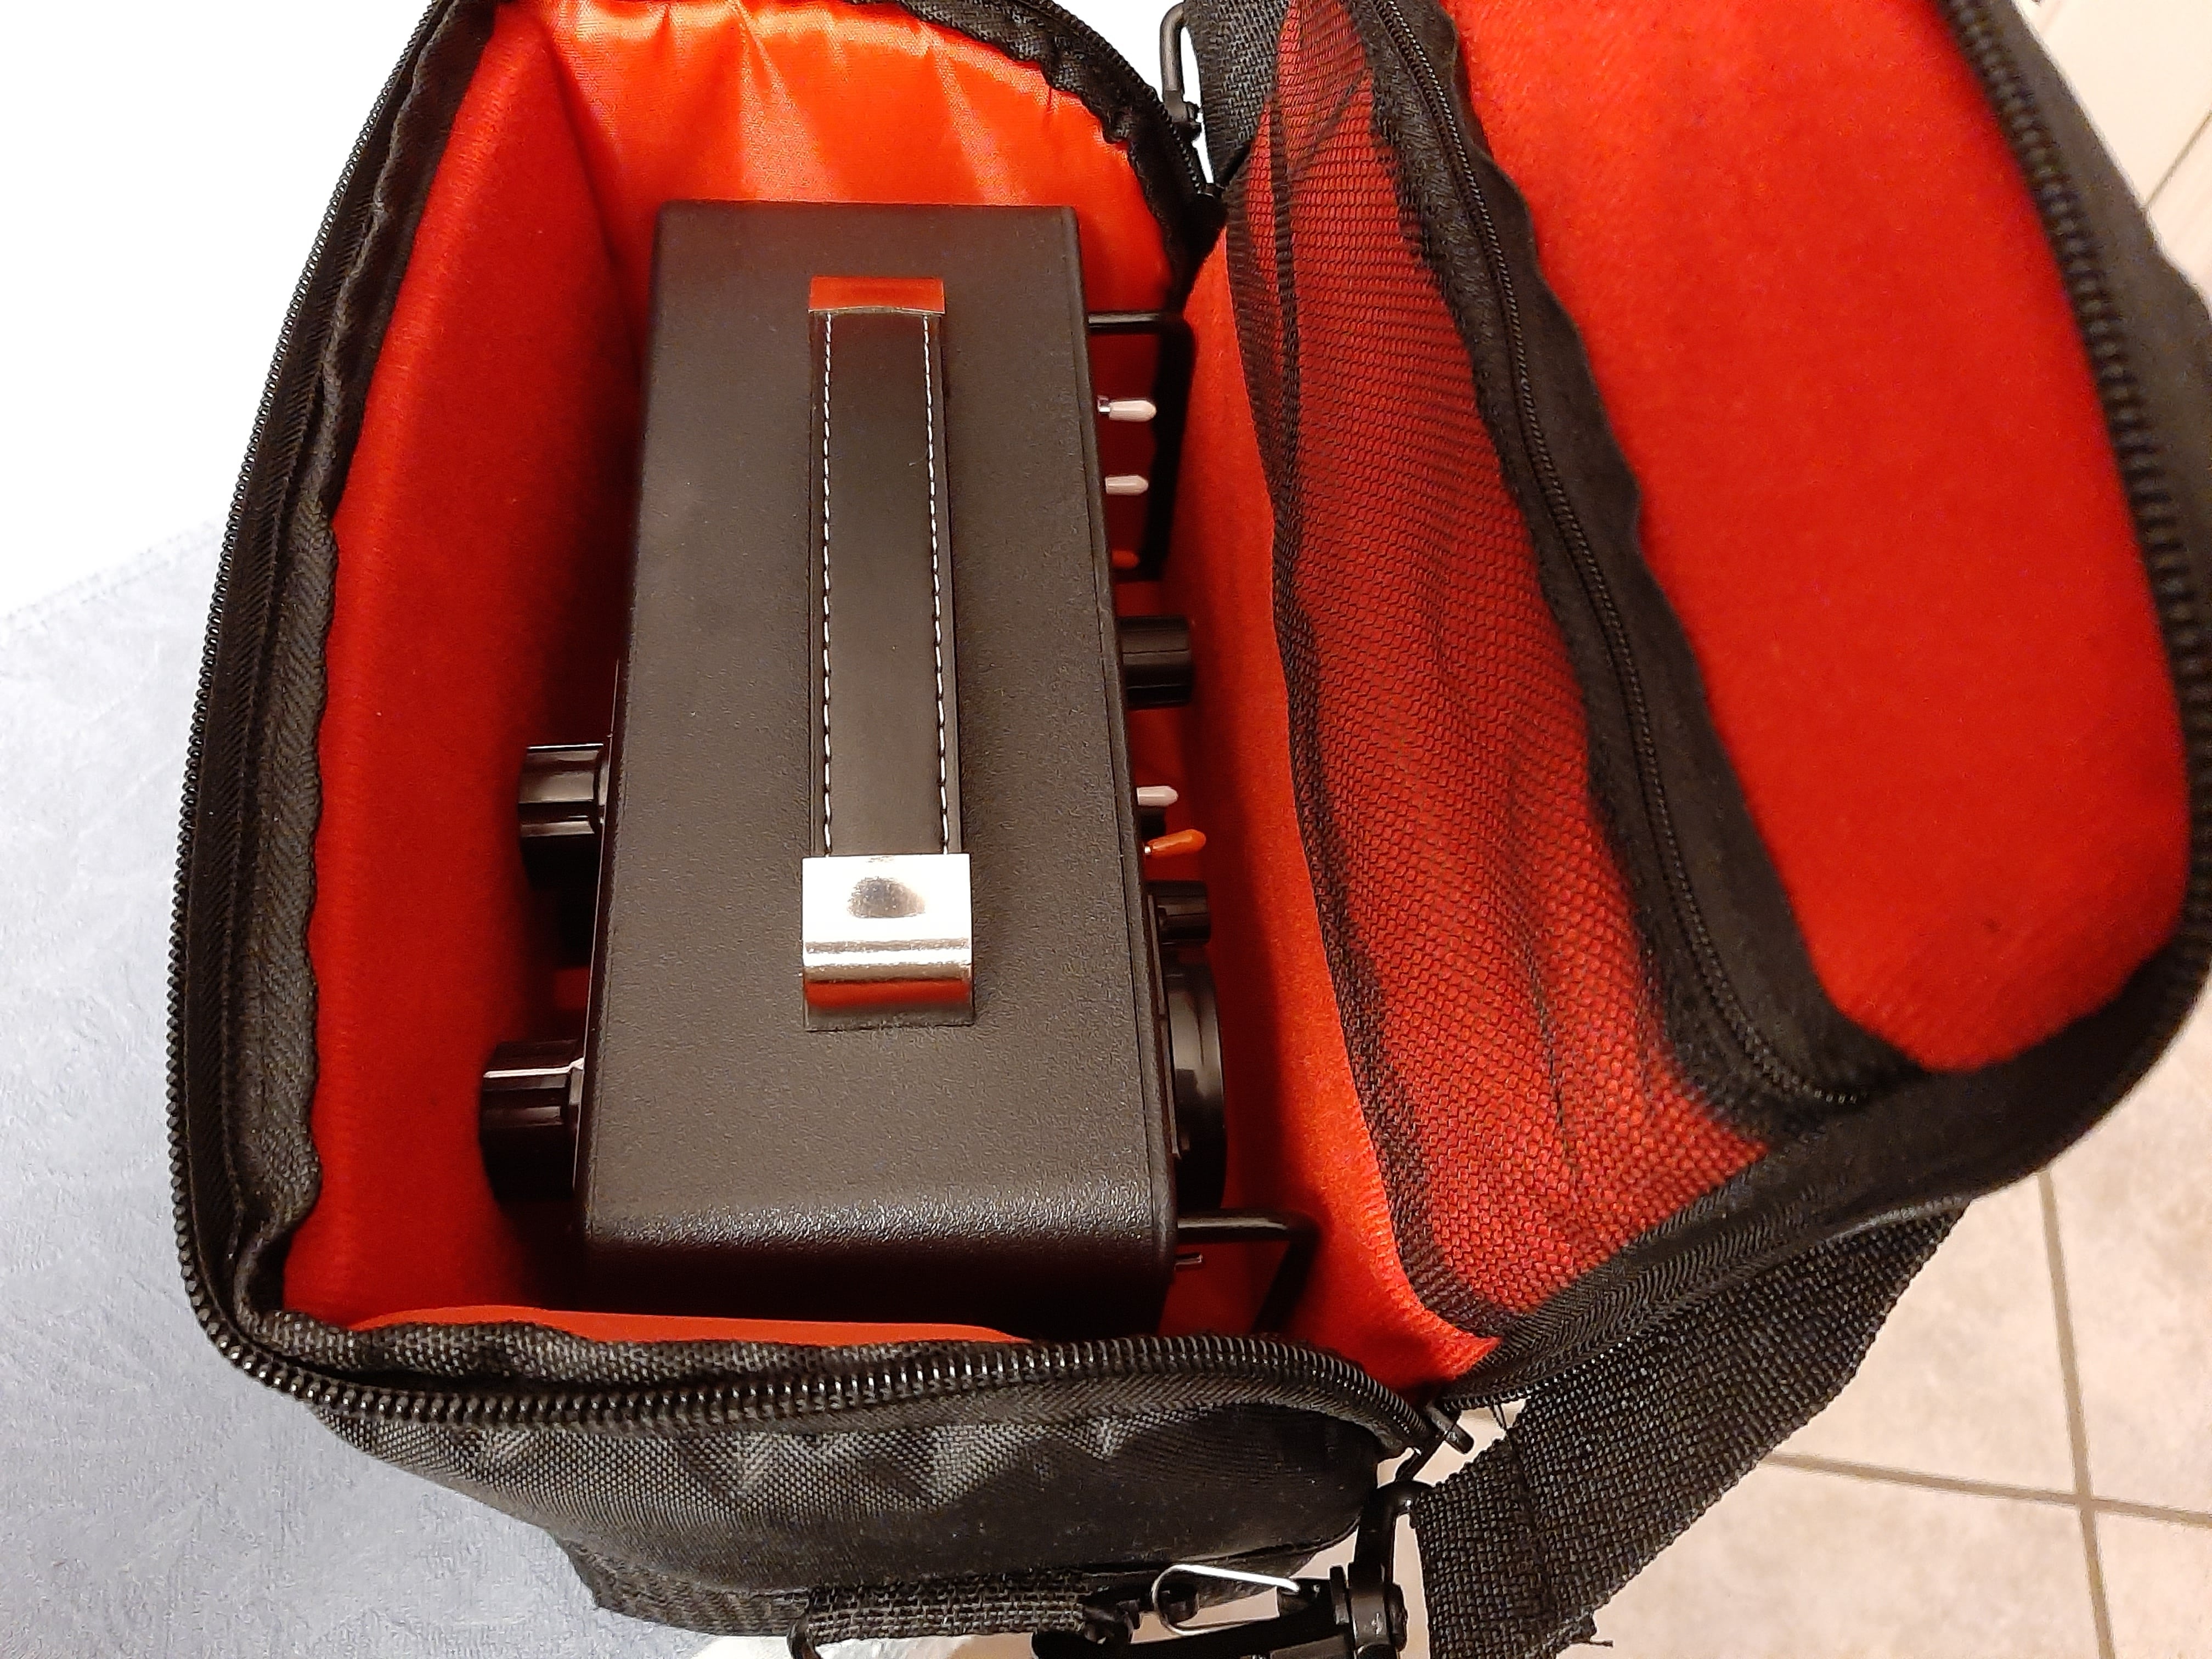 Carrying Case Featuring the TR-45L